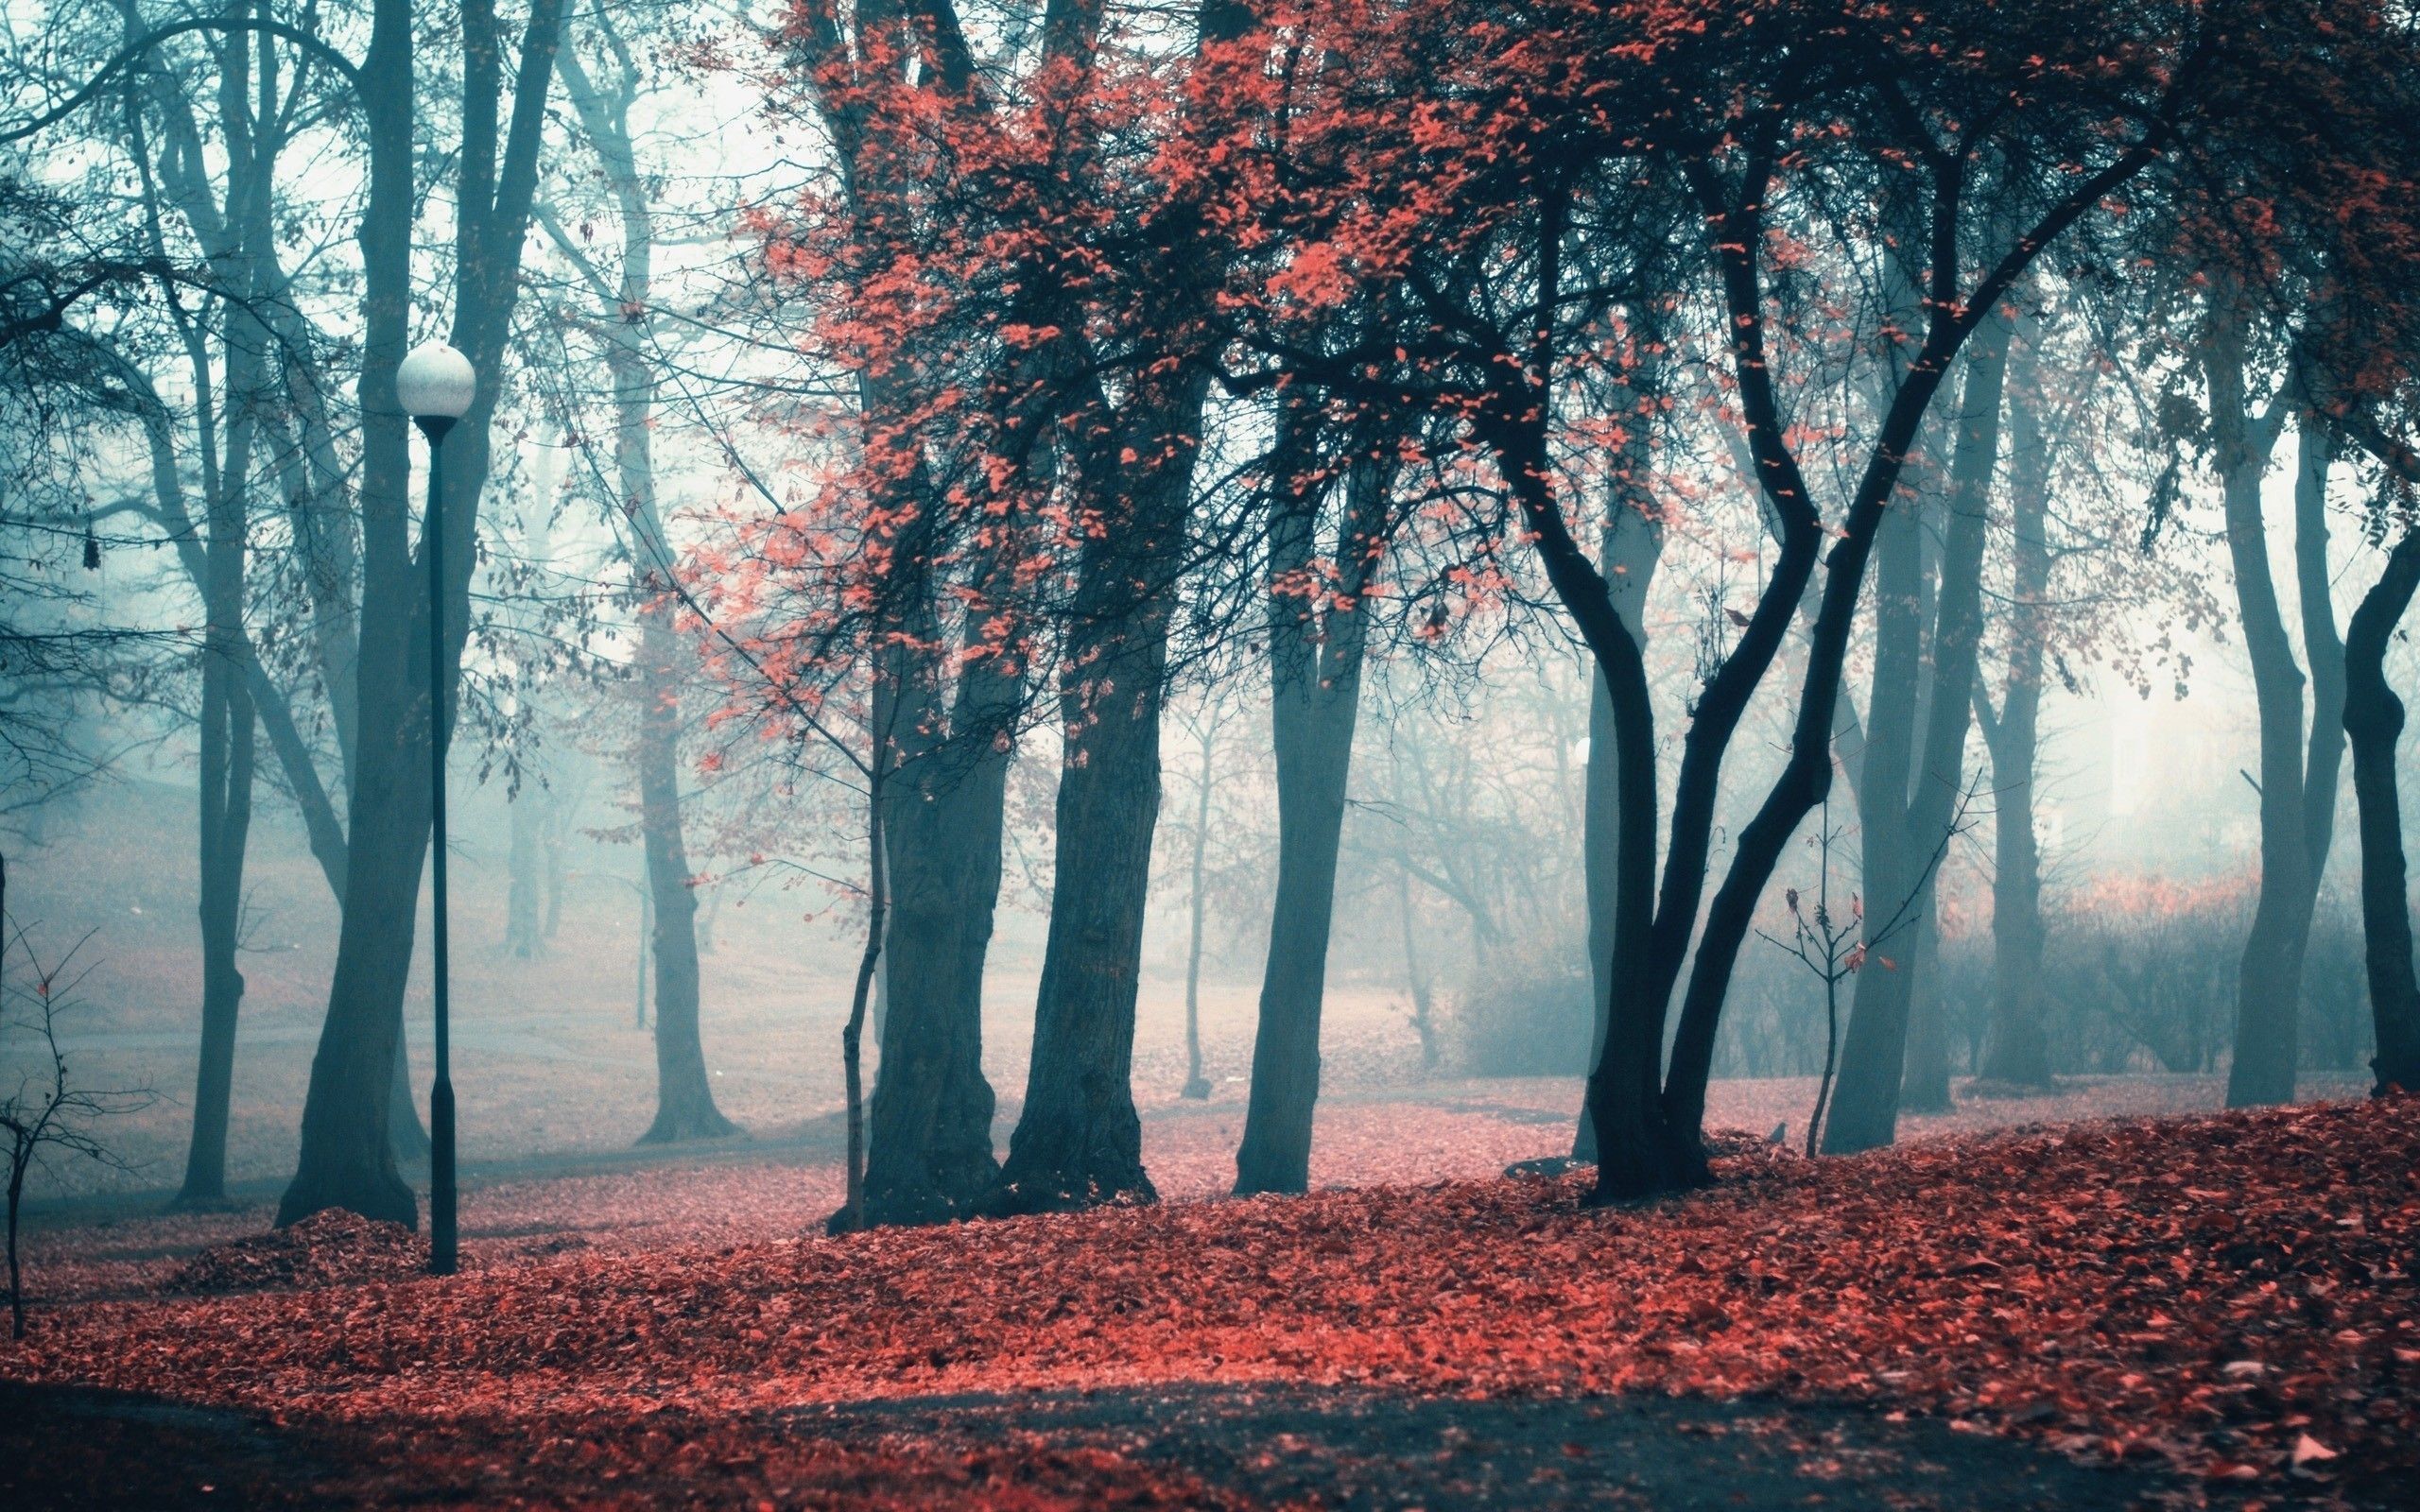 A foggy forest with red leaves on the ground - Vintage fall, leaves, fog, scenery